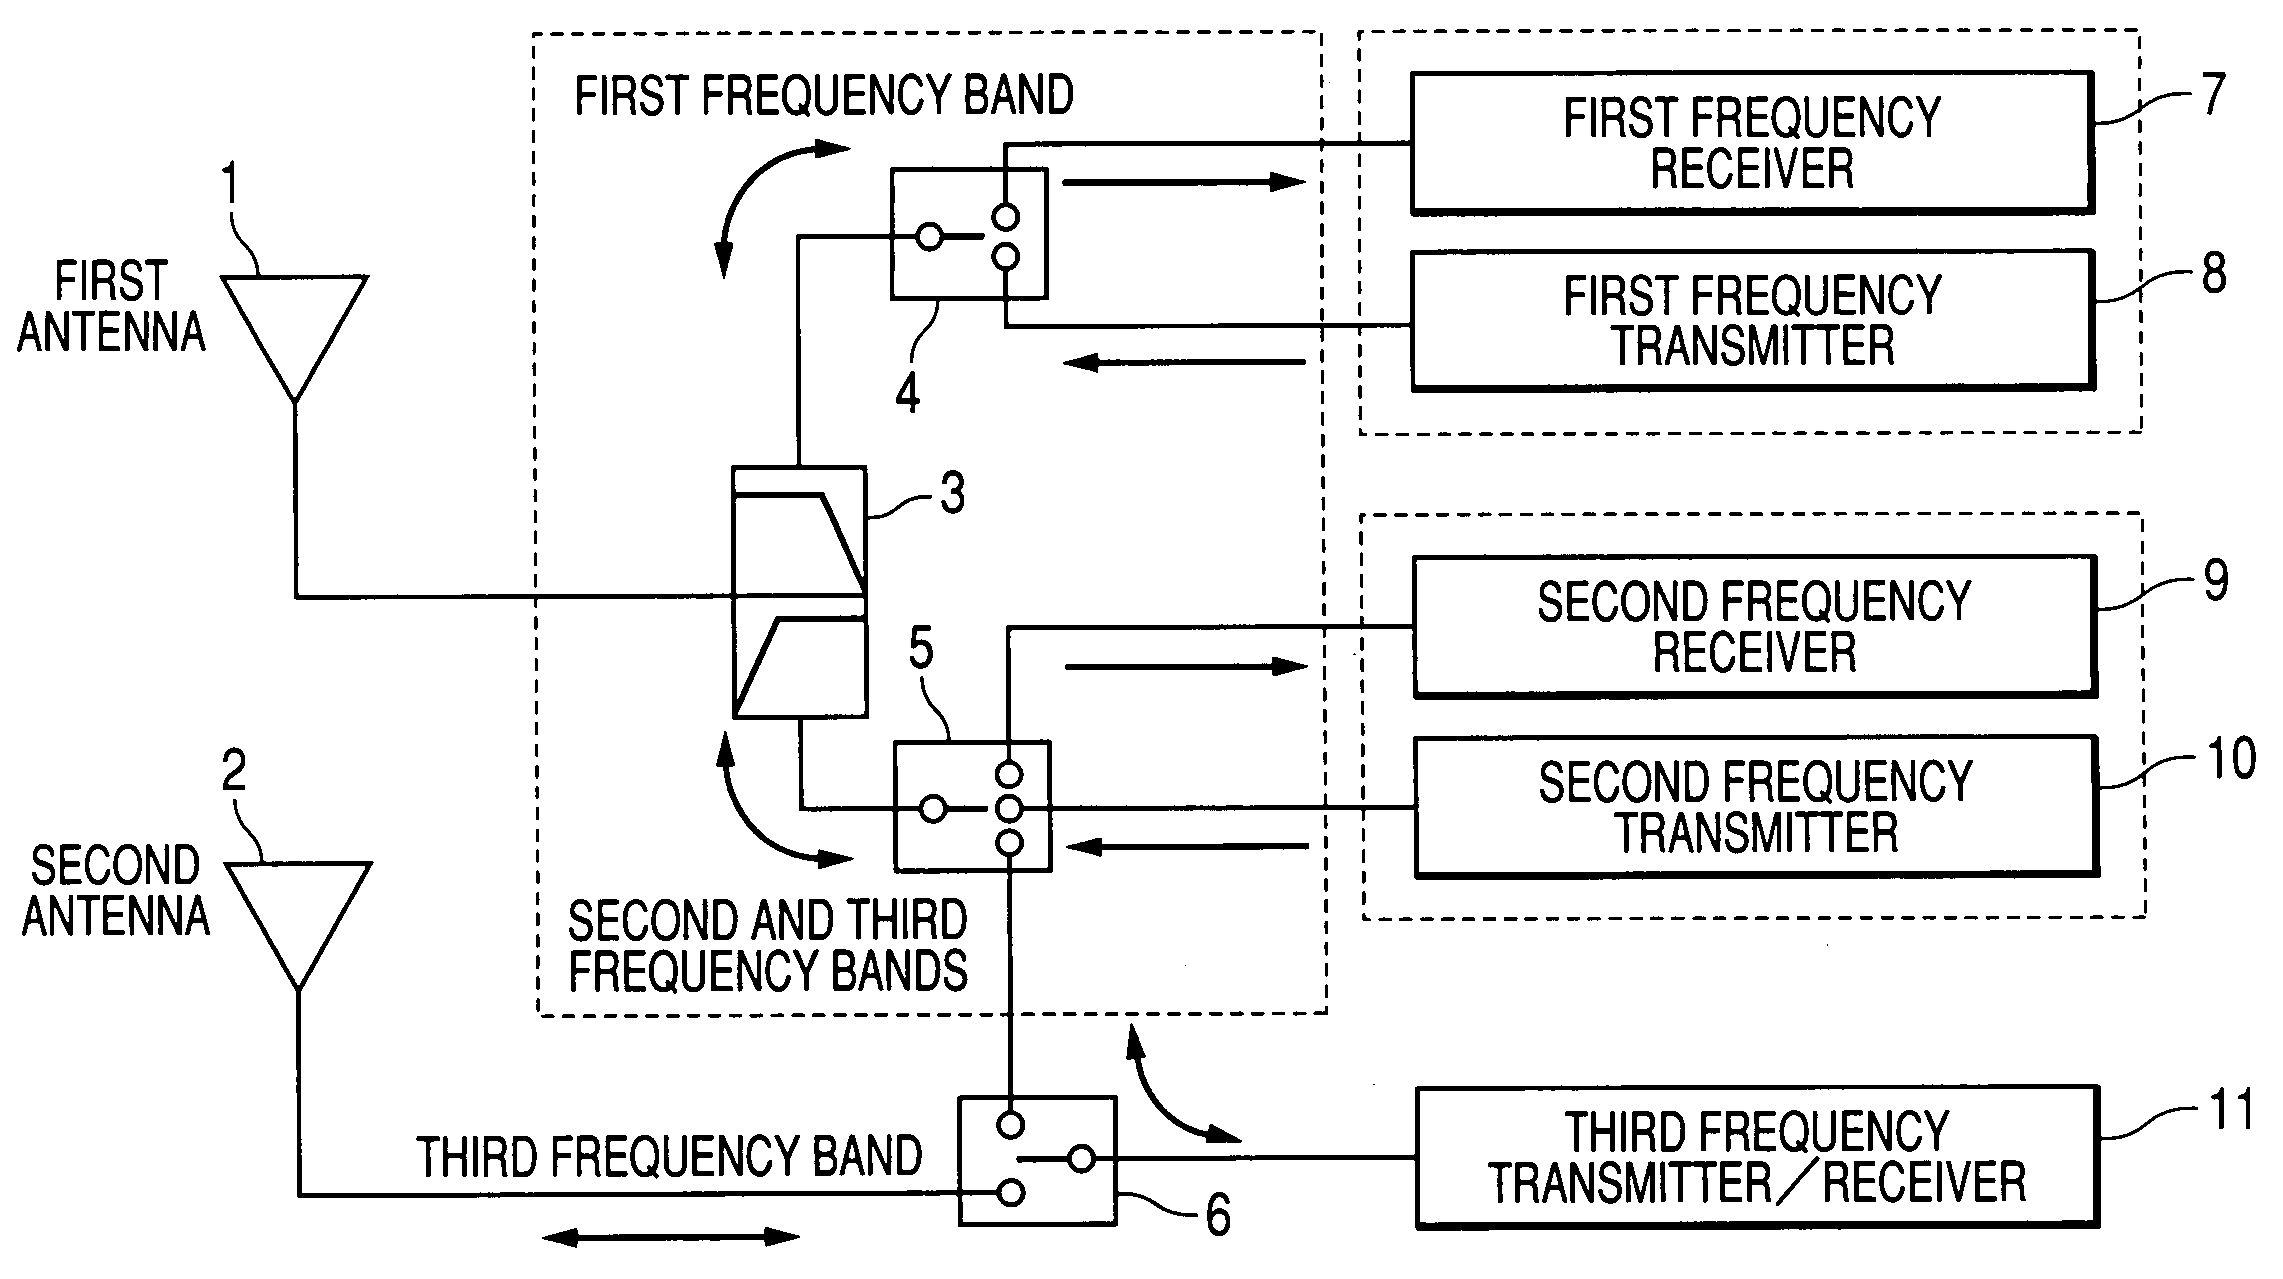 Antenna device with a first and second antenna